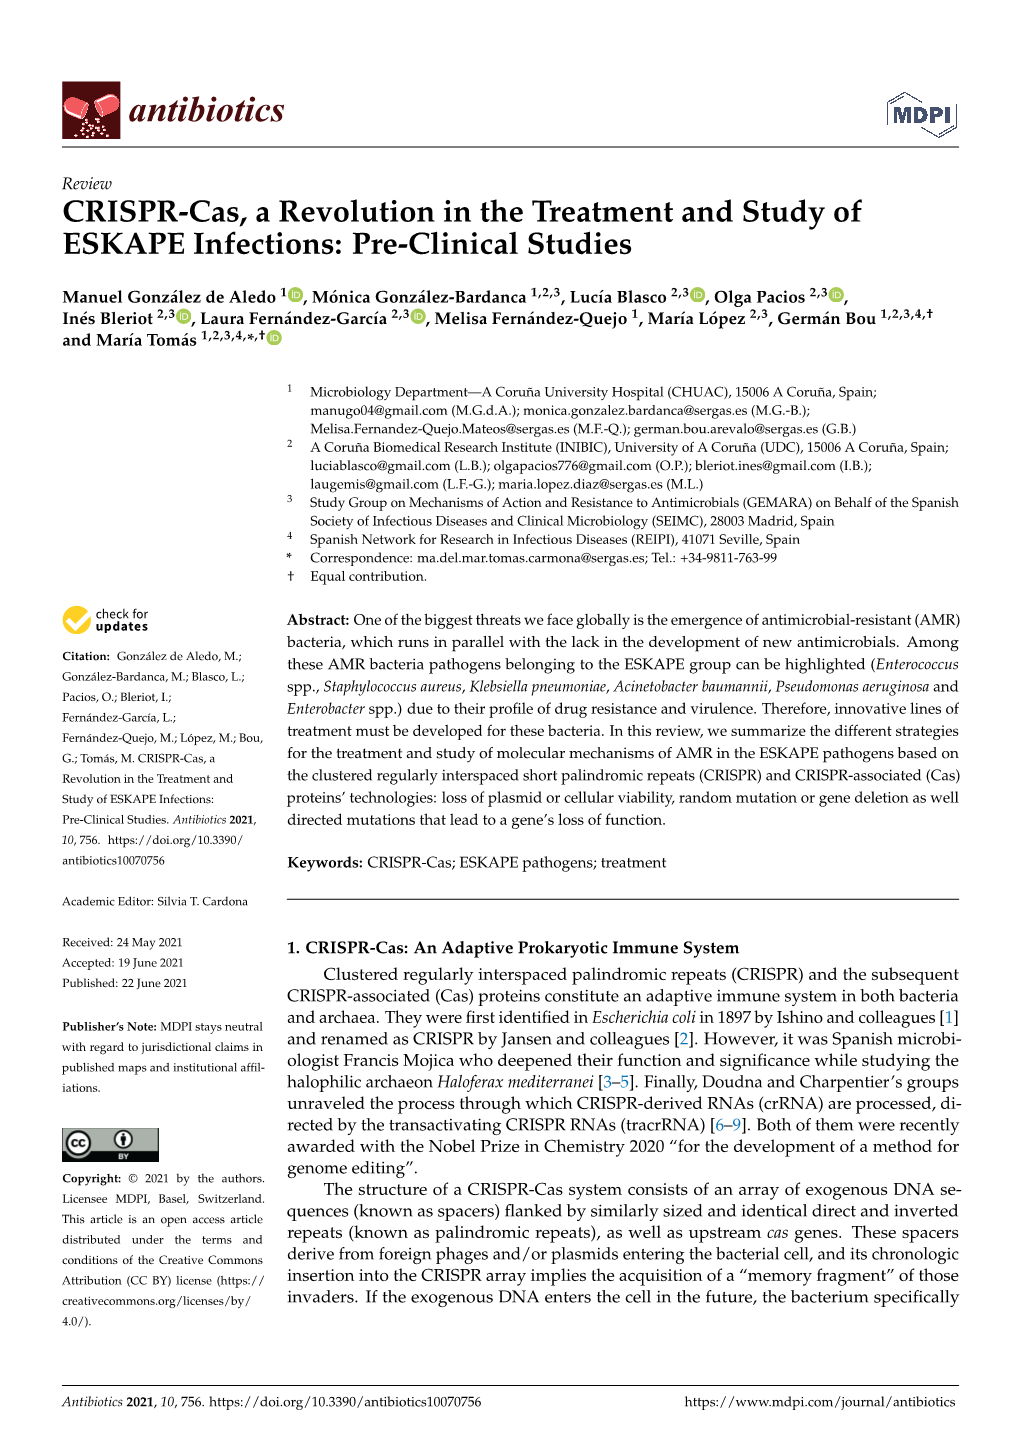 CRISPR-Cas, a Revolution in the Treatment and Study of ESKAPE Infections: Pre-Clinical Studies